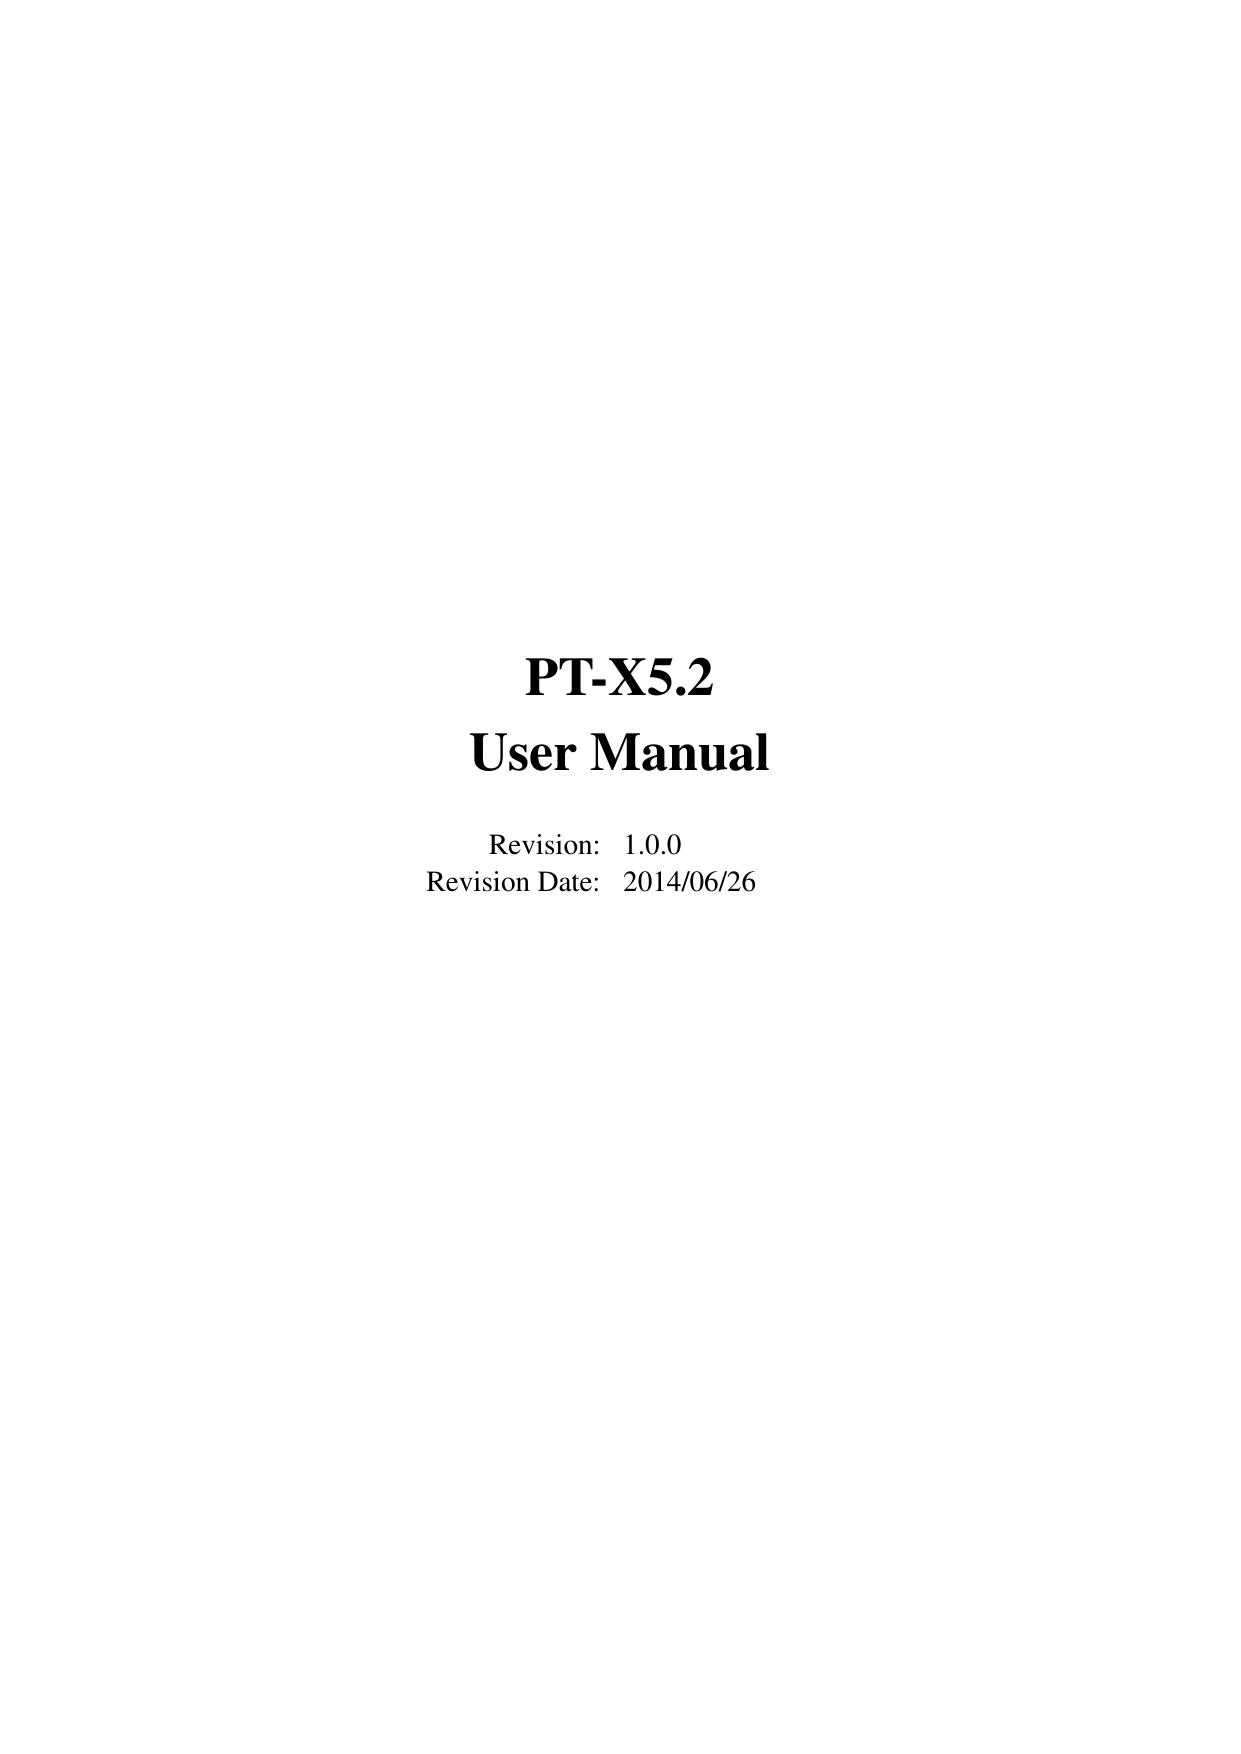        PT-X5.2 User Manual  Revision: 1.0.0 Revision Date: 2014/06/26       